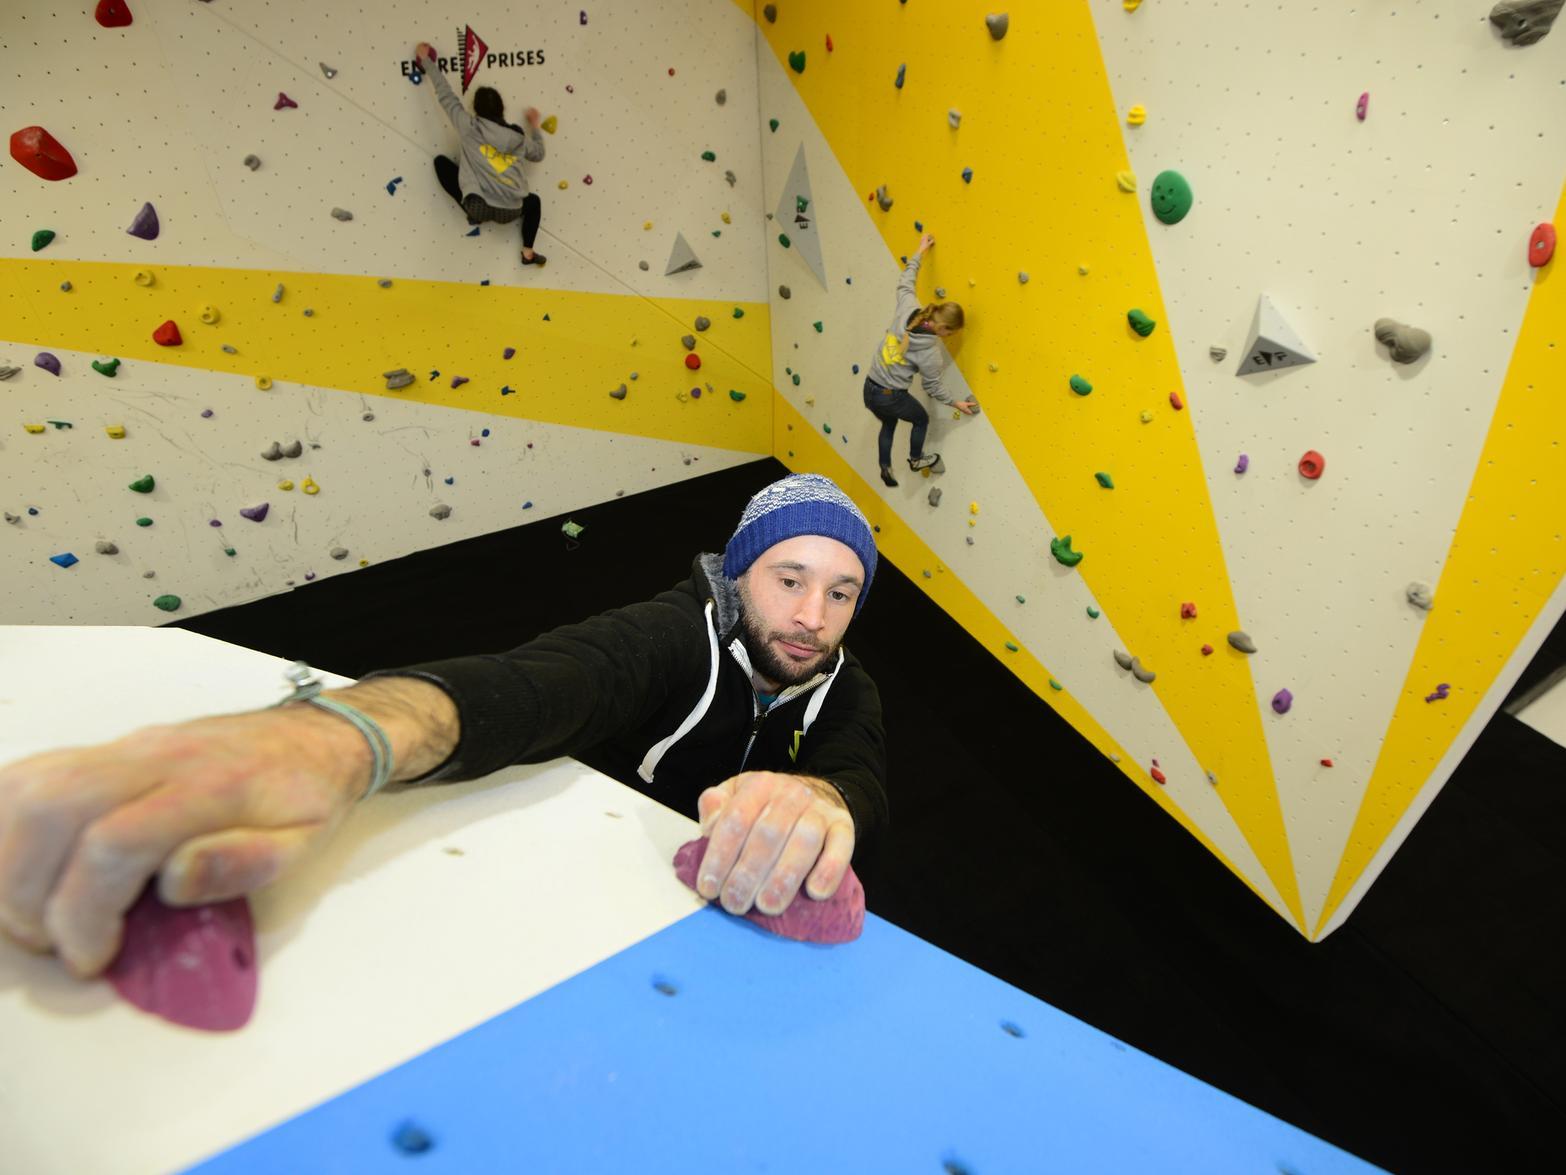 Fuel your desire for challenge and adventure and test your head for heights at The Climbing Lab, City Bloc or The Leeds Wall, which offer indoor climbing facilities for a range of abilities.